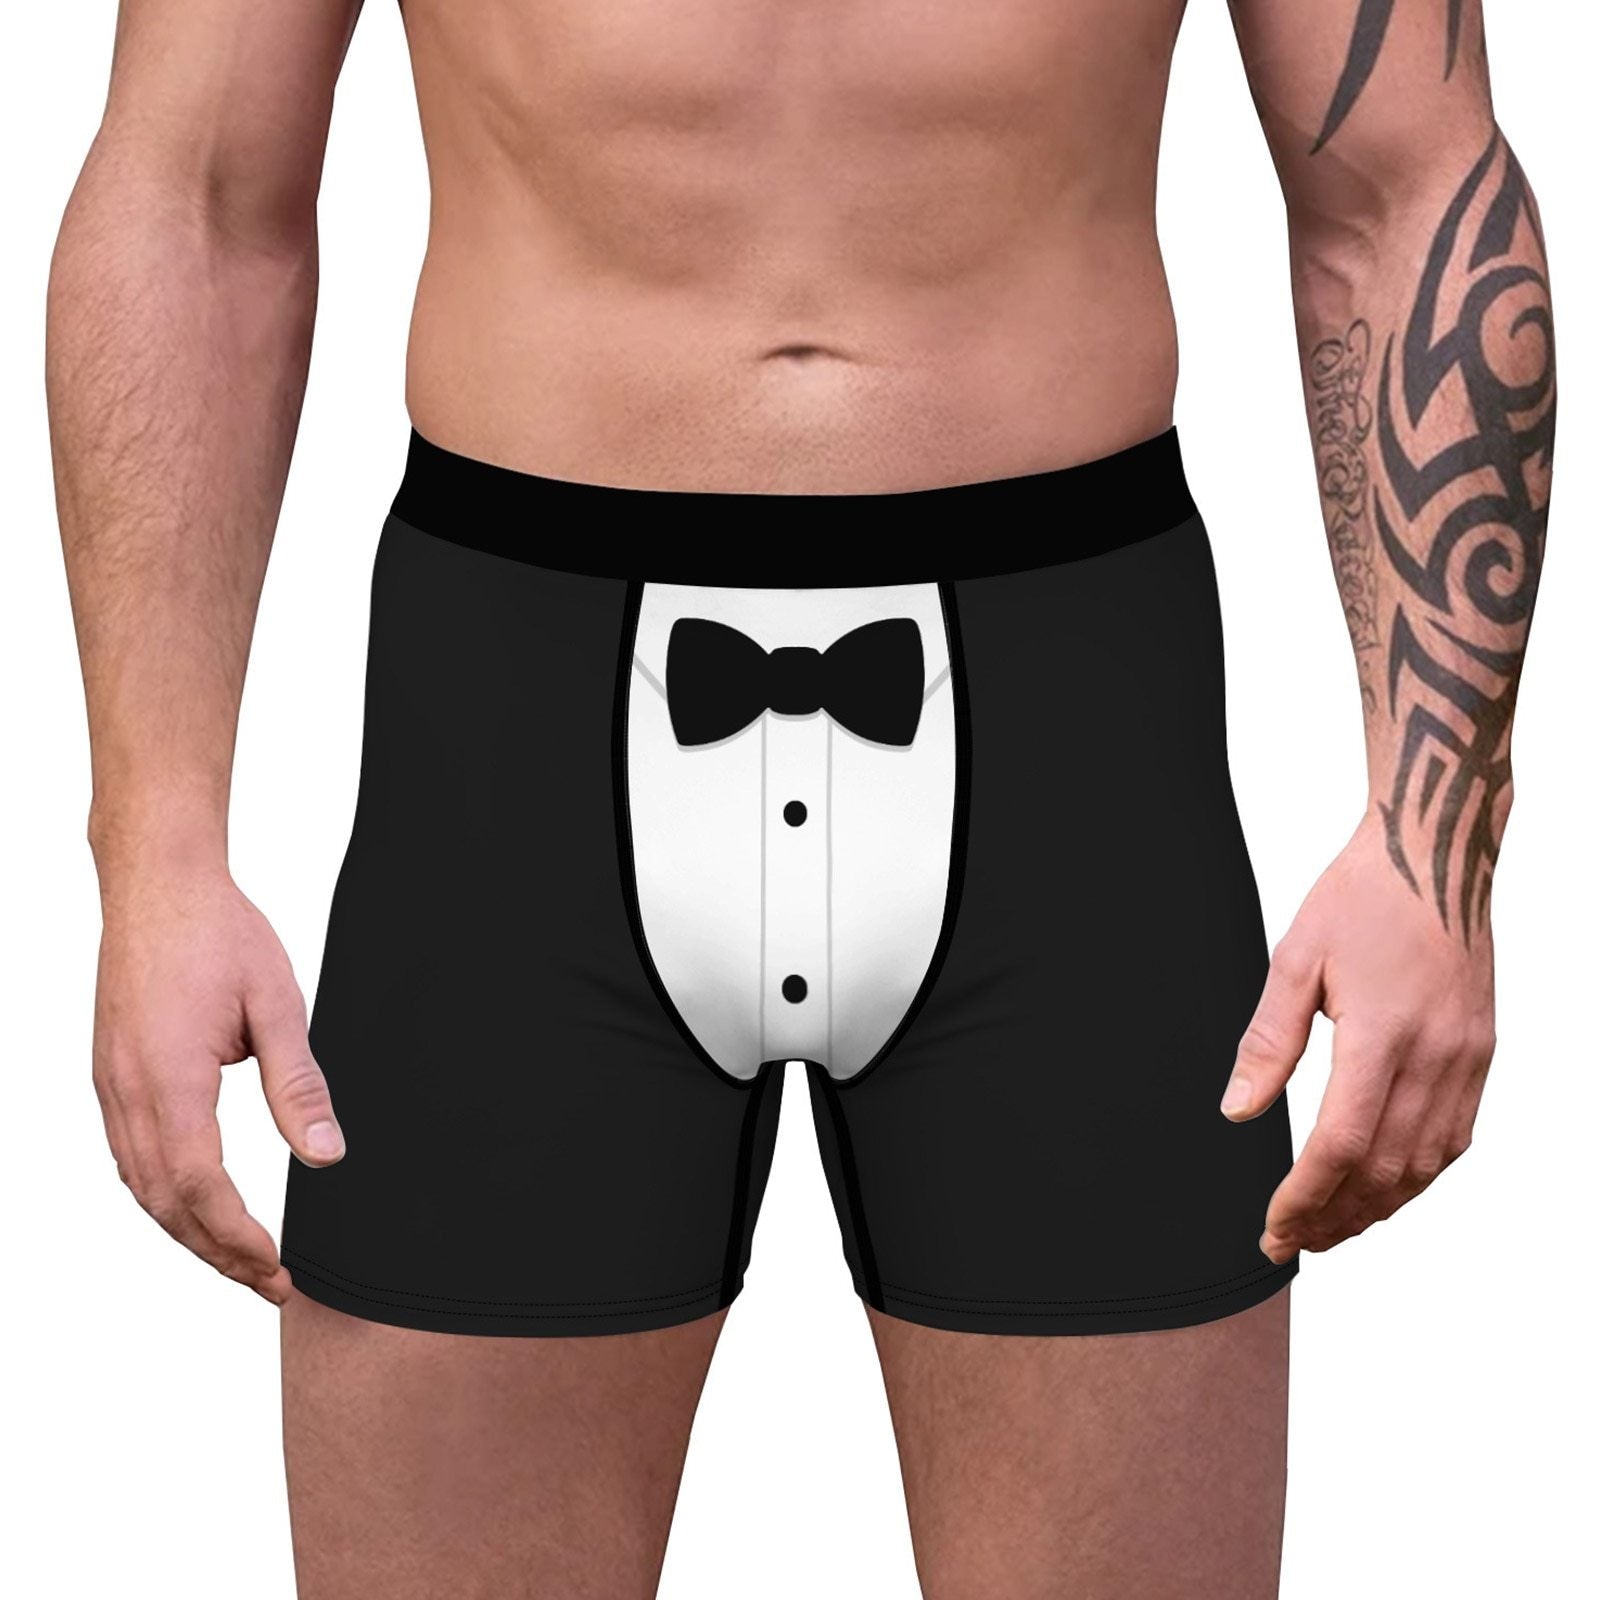 SALE - XMAS GIFT - Mens Christmas Boxer Shorts Printed Holiday Season Tuxedo with Tie Front